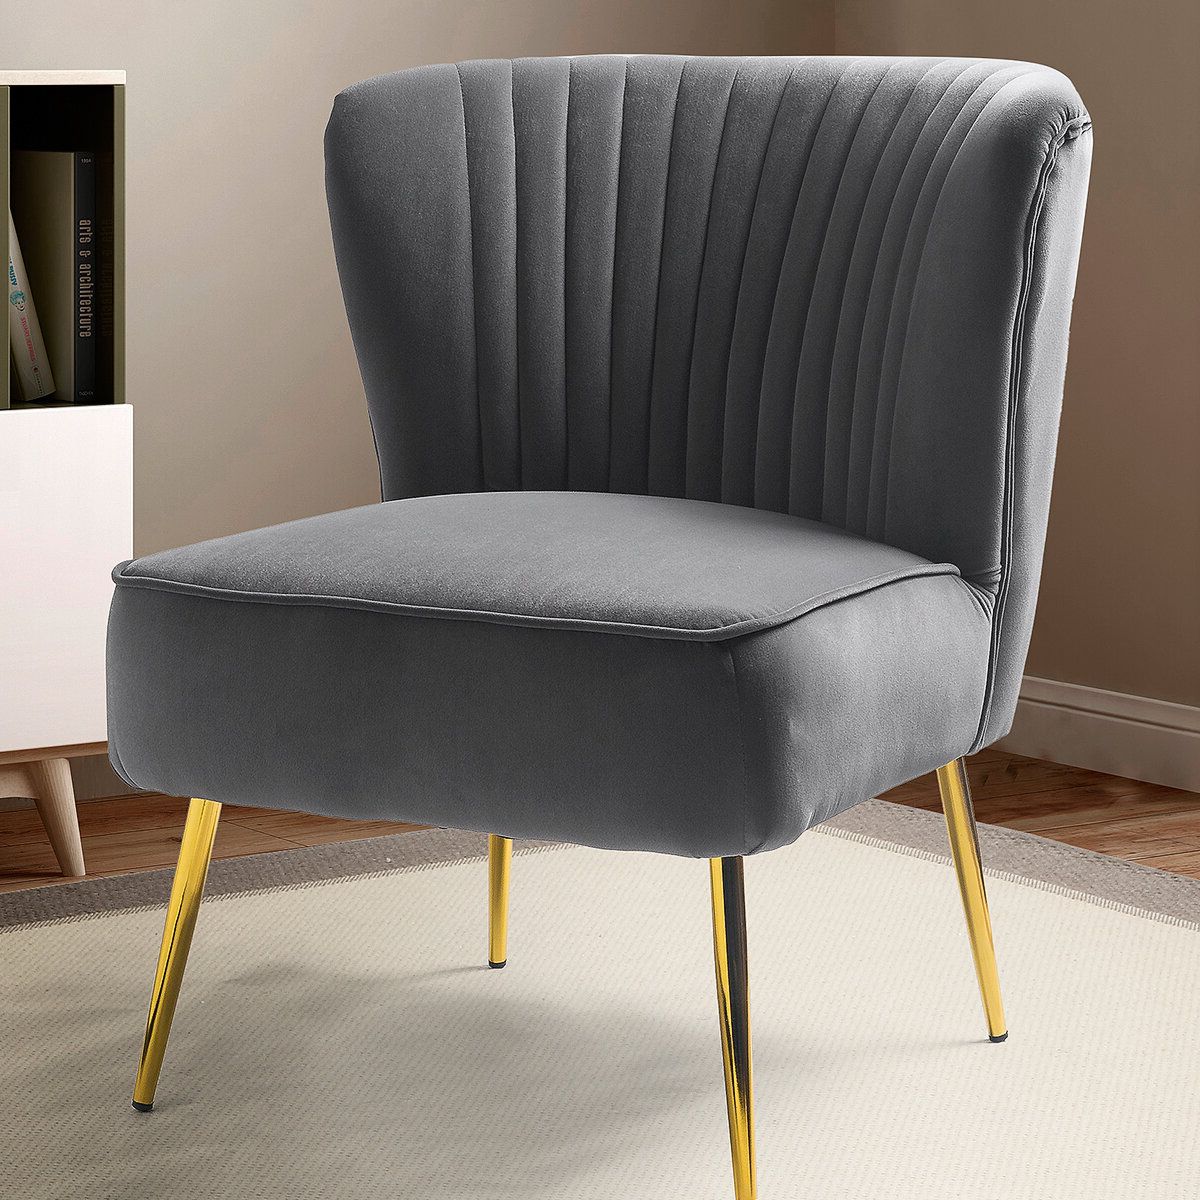 Suki Armchairs By Canora Grey Pertaining To Current Ivo 30" W Tufted Wingback Chair (View 17 of 20)